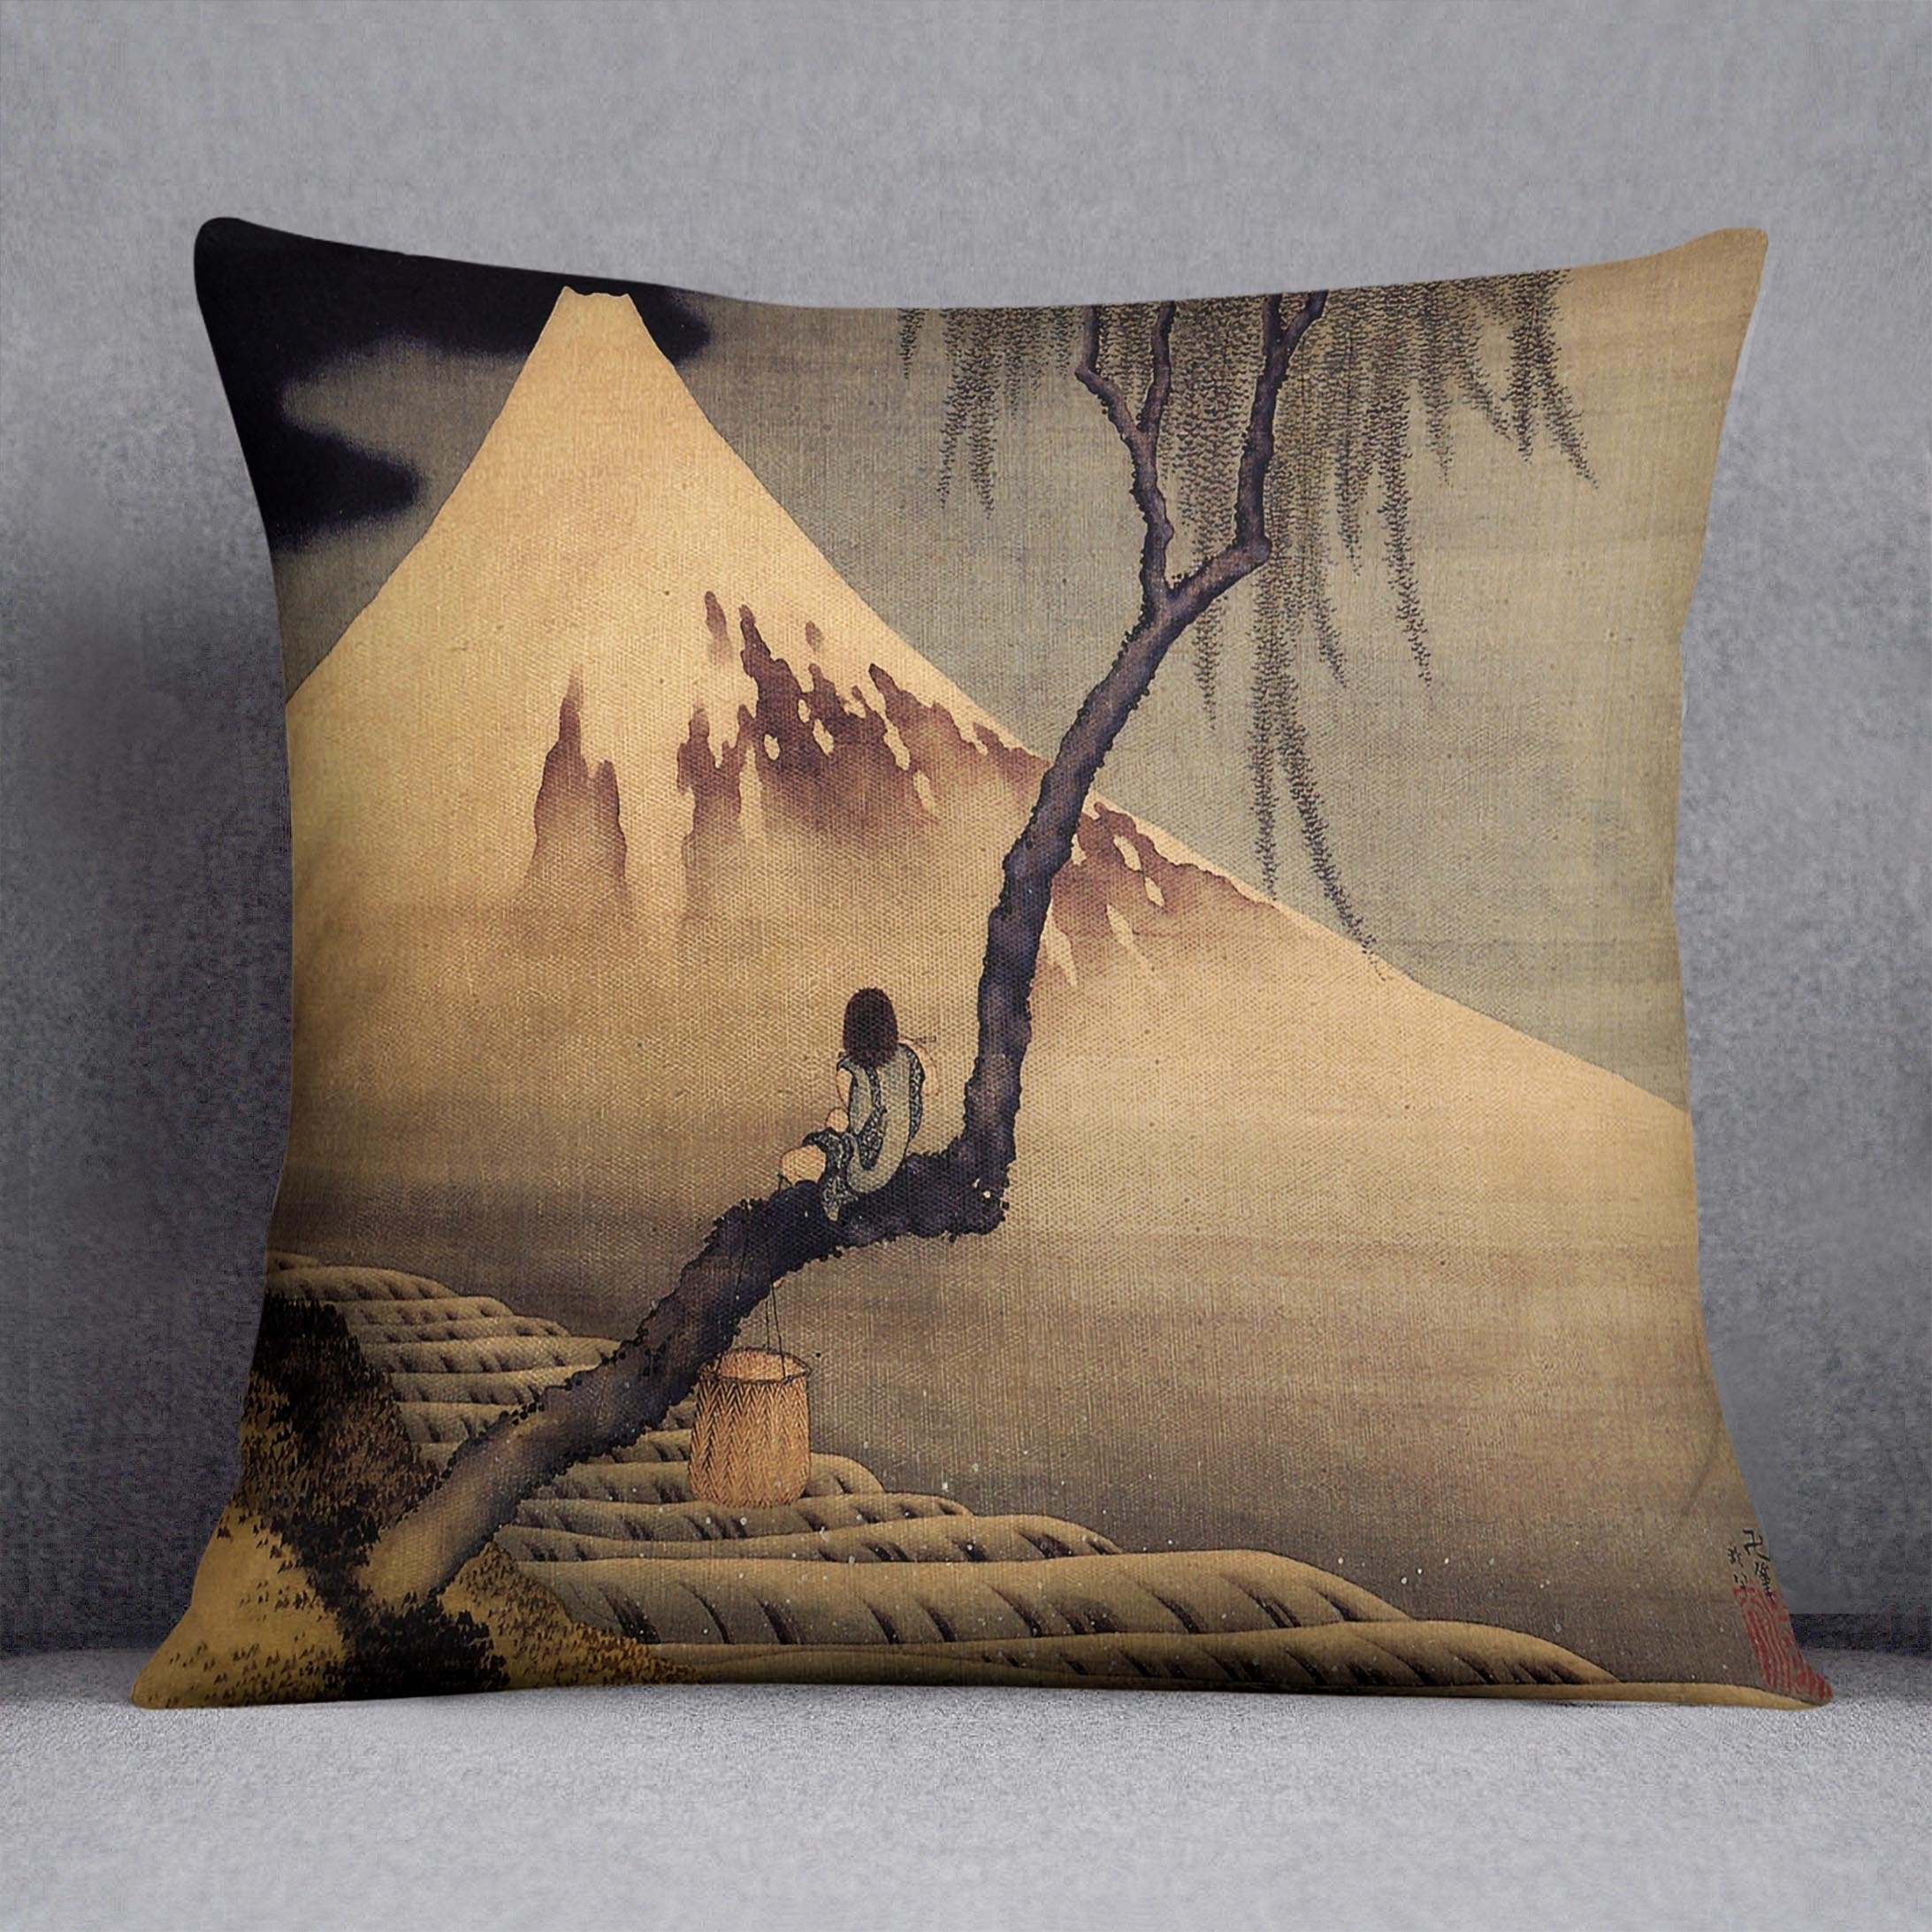 Boy in front of Fujiama by Hokusai Throw Pillow